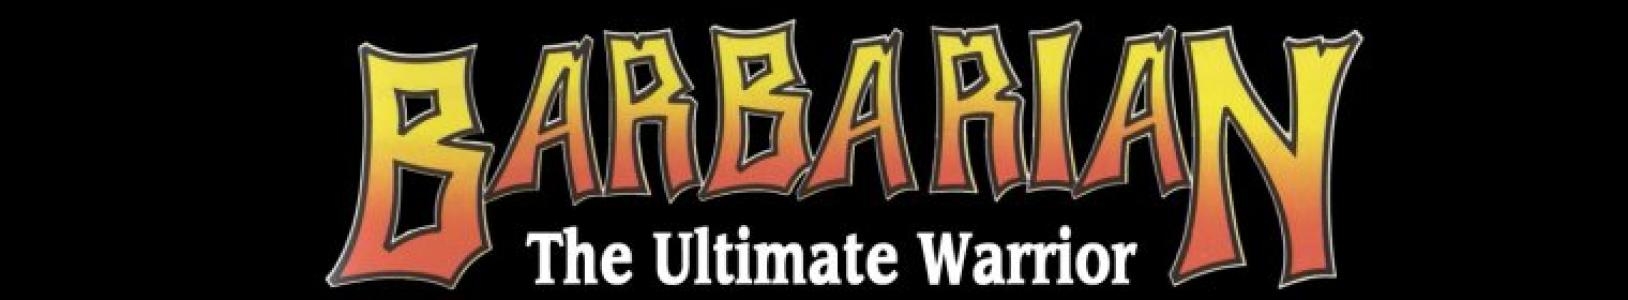 Barbarian: The Ultimate Warrior banner